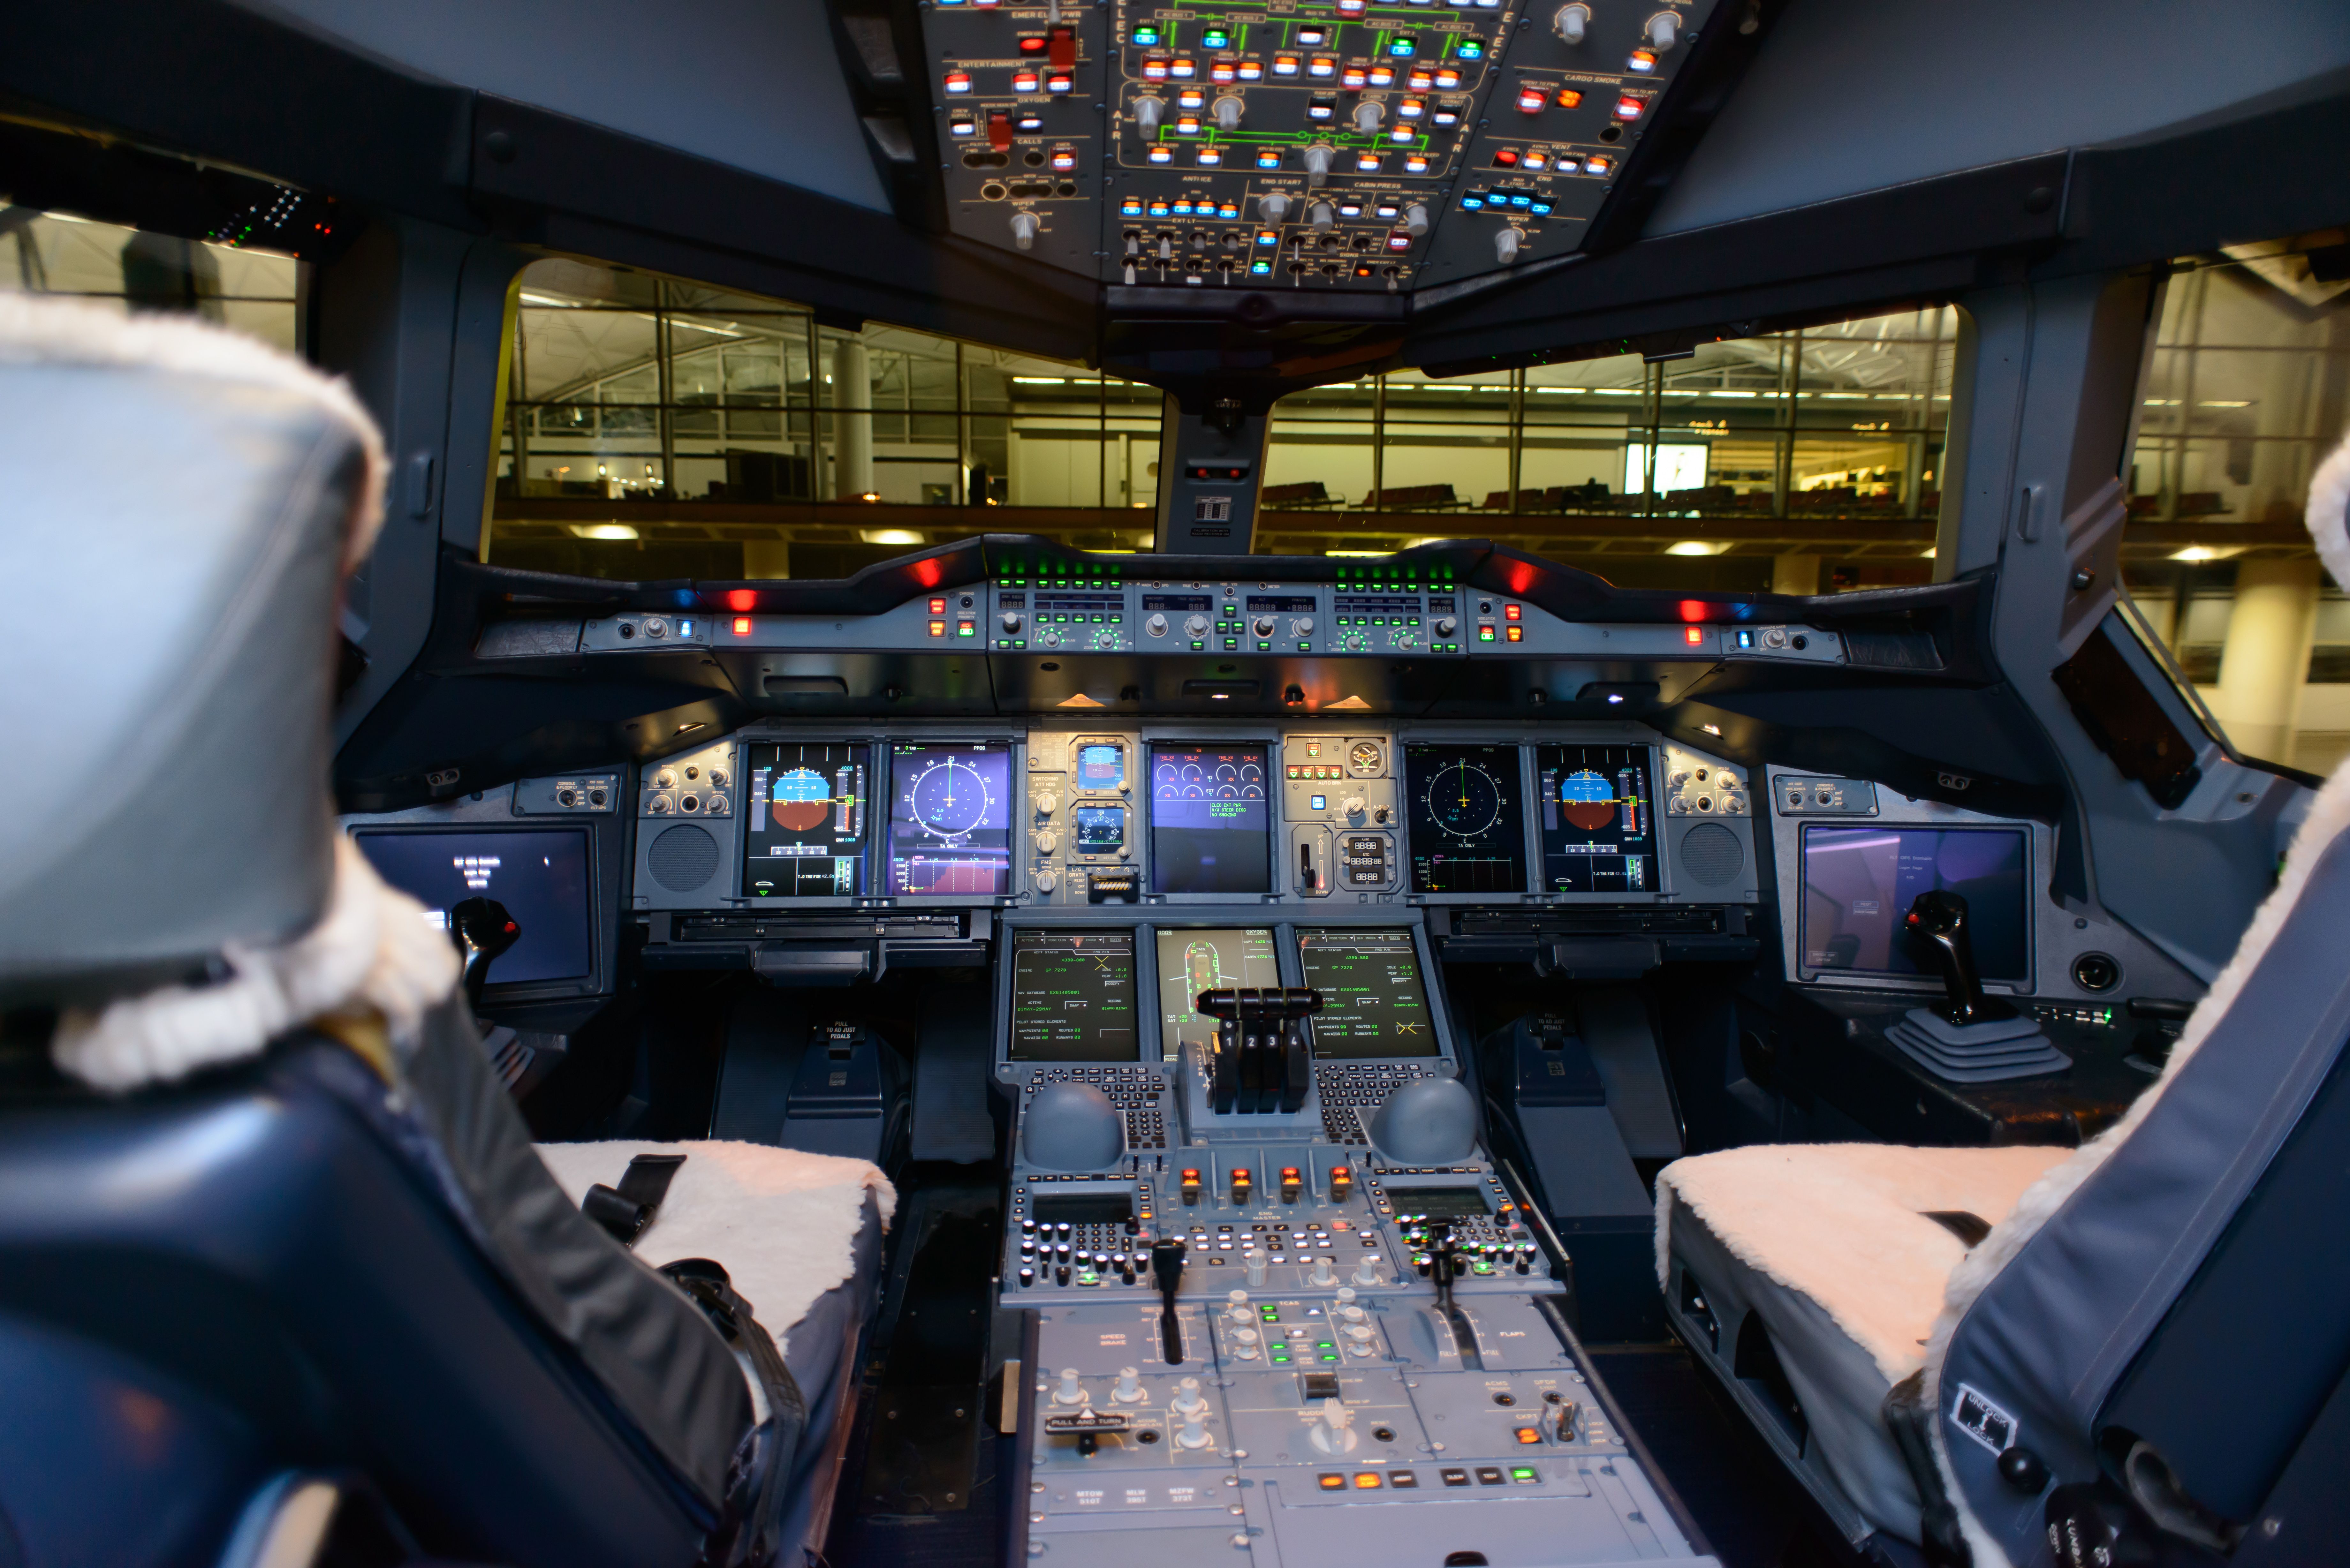 Inside the cockpit of an aircraft parked in front of an airport terminal.